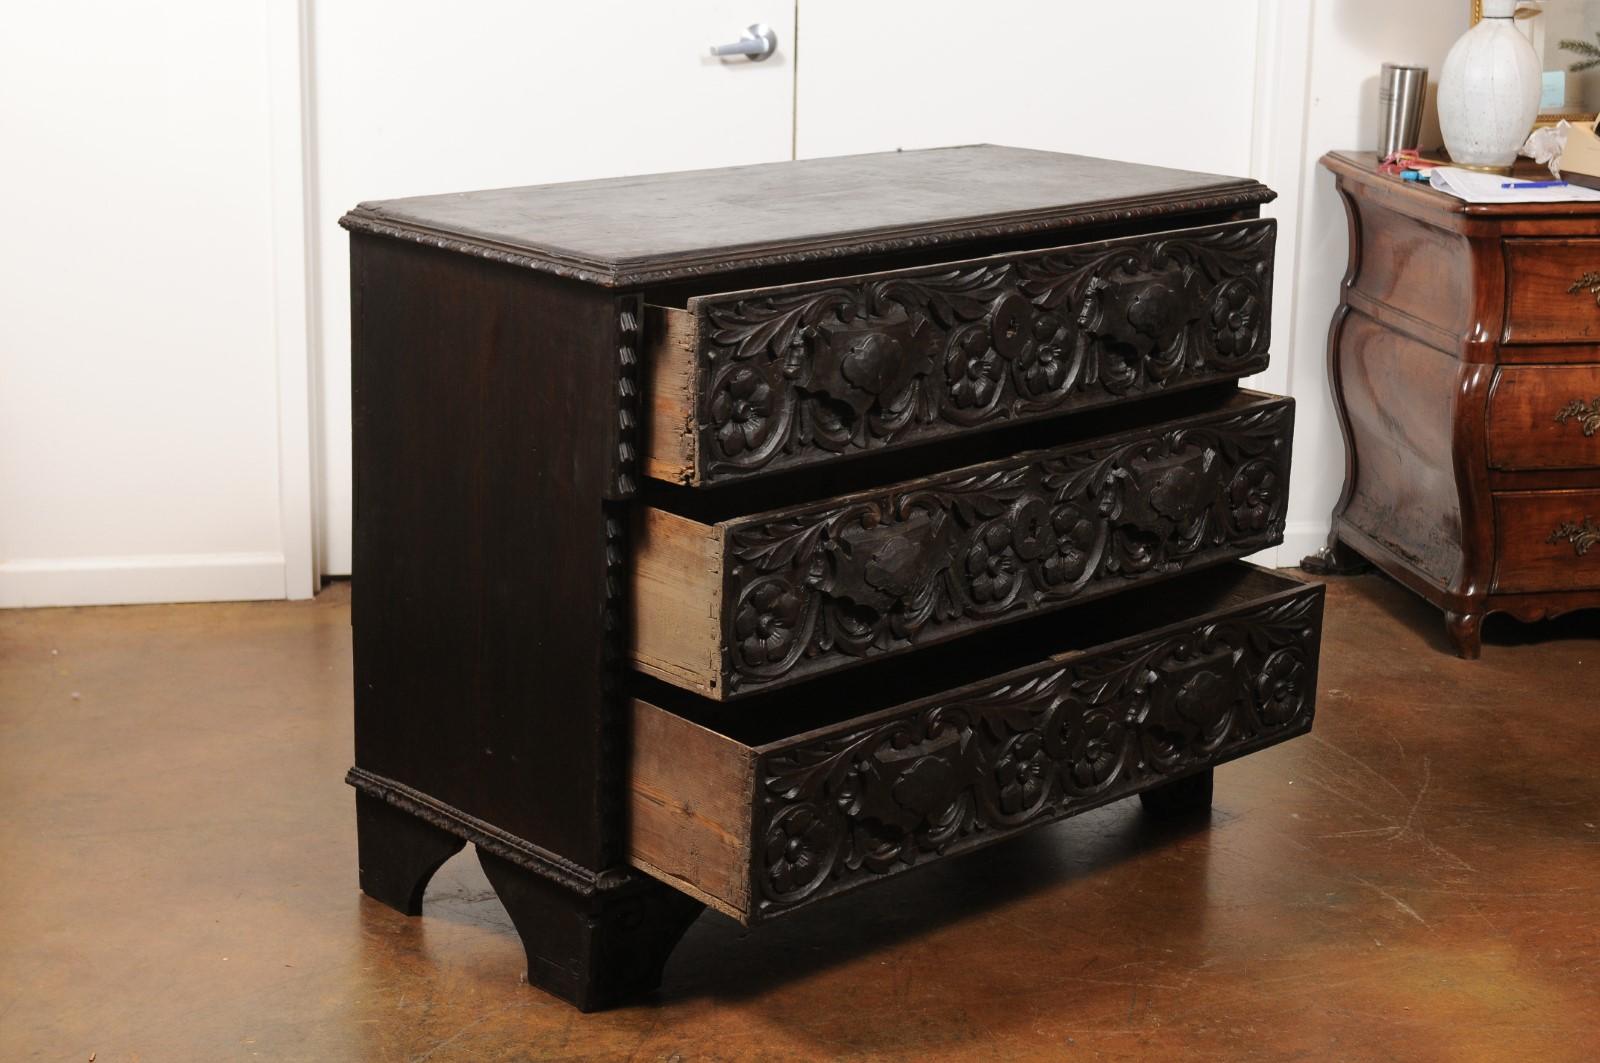 An Italian wooden three-drawer chest from the mid 19th century, with hand-carved scrollwork décor and dark patina. Born in Italy during the third quarter of the 19th century, this commode will charm you with its exquisite hand-carved décor of